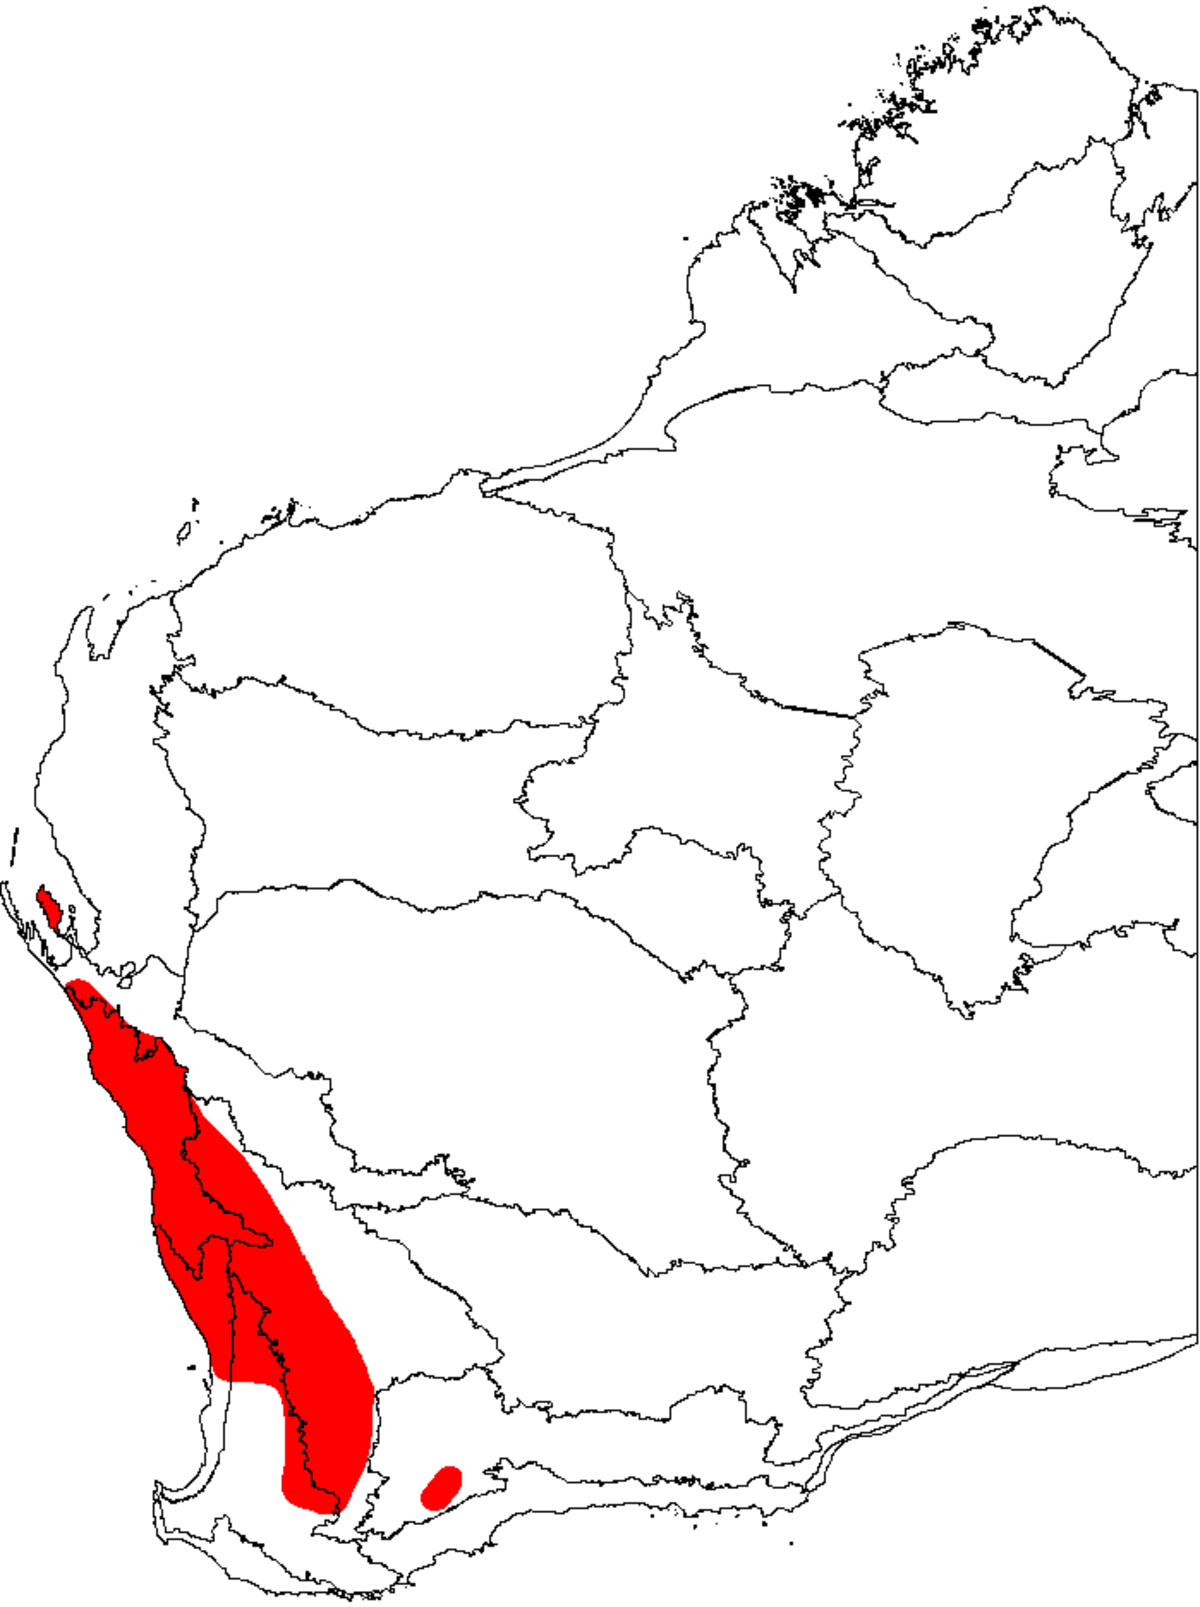 Banksia prionotes map.png